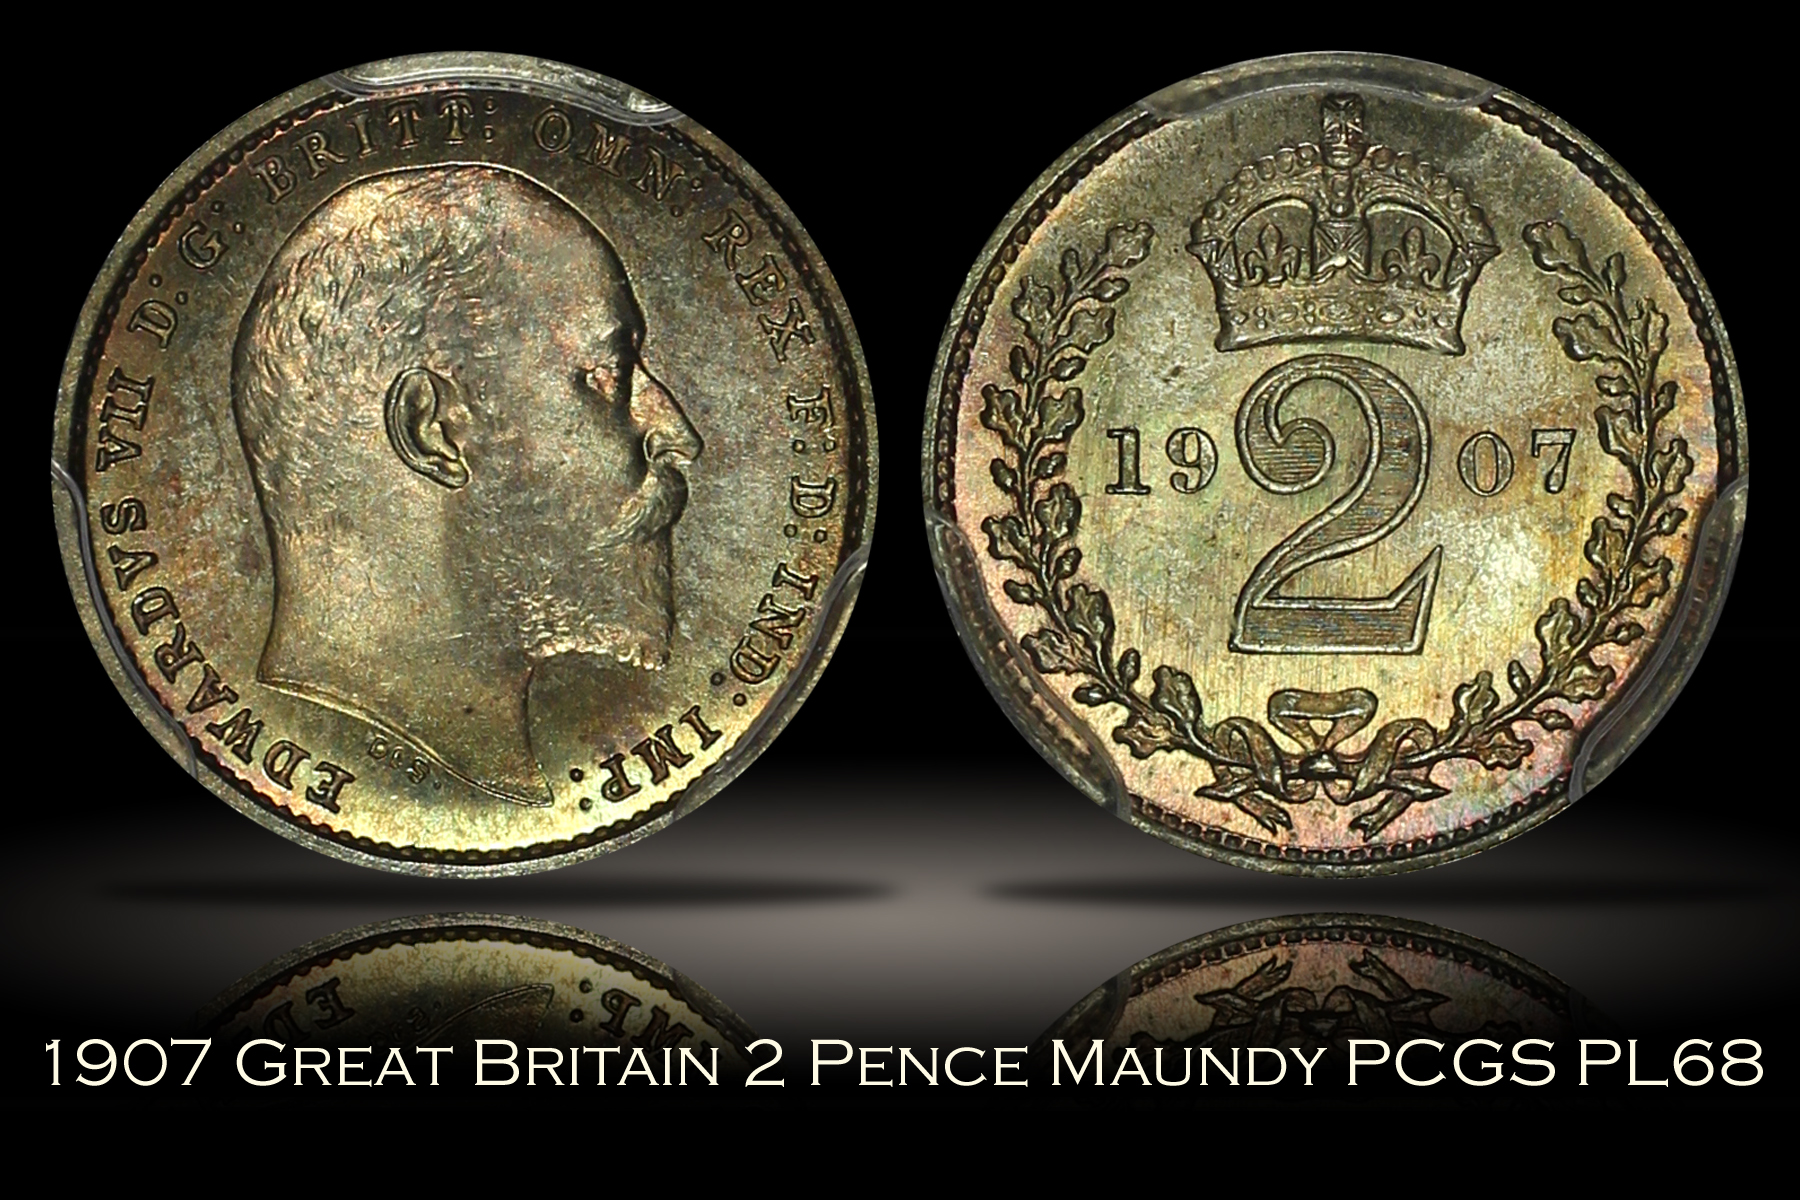 1907 Great Britain 2 Pence Maundy PCGS PL68